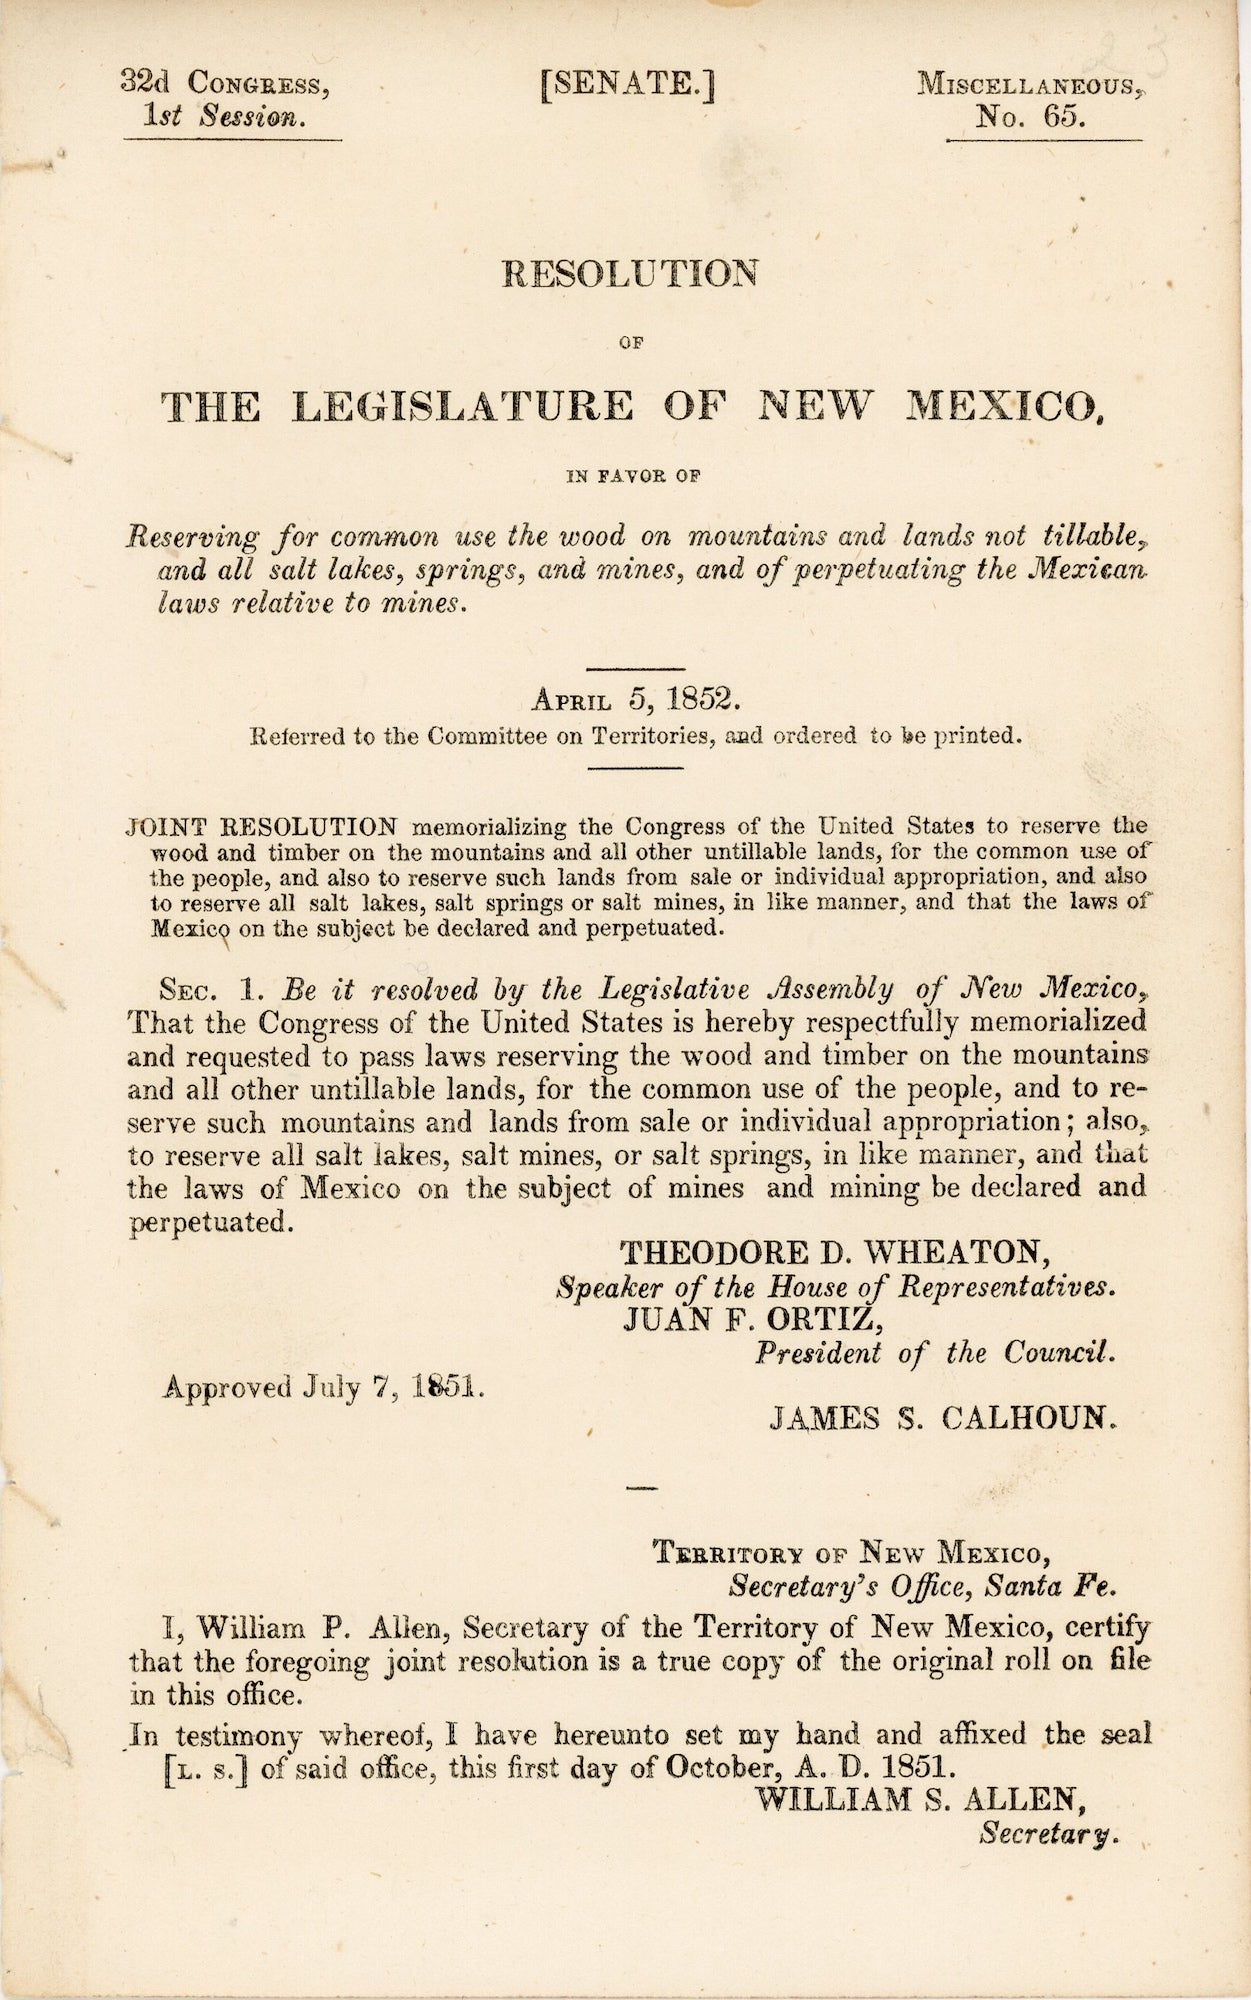 [Salt. Land Use] [New Mexico] - Resolution of the Legislature of New Mexico, in Favor of Reserving for Common Use the Wood on Mountains and Lands Not Tillable, and All Salt Lakes, Springs, and Mines, and of Perpetuating the Mexican Laws Relative to Mines. April 5, 1852